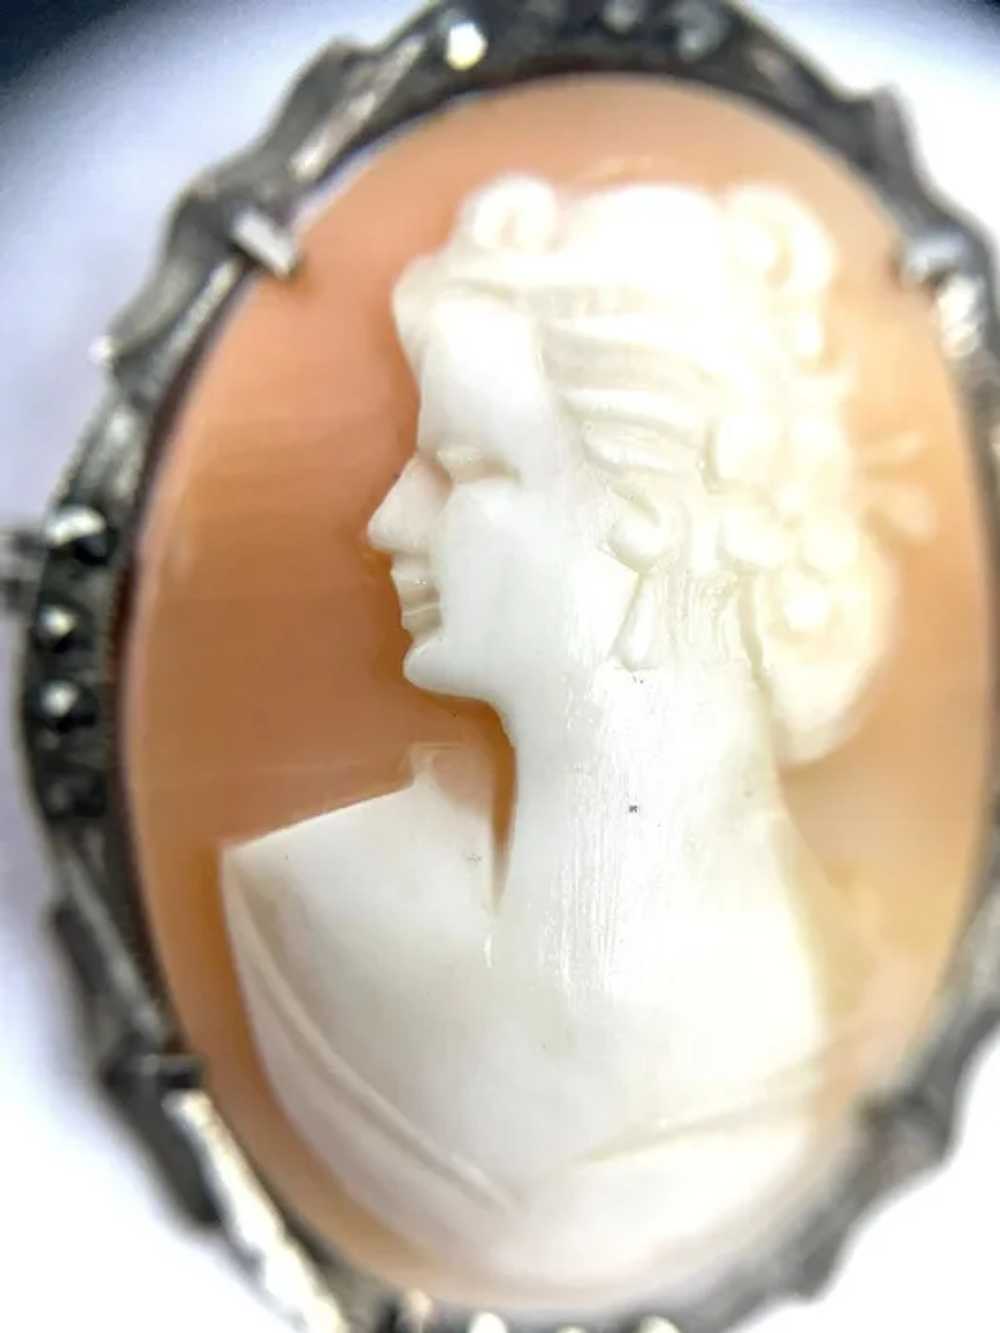 Shell Cameo Marcasite Brooch or Pendant - image 2